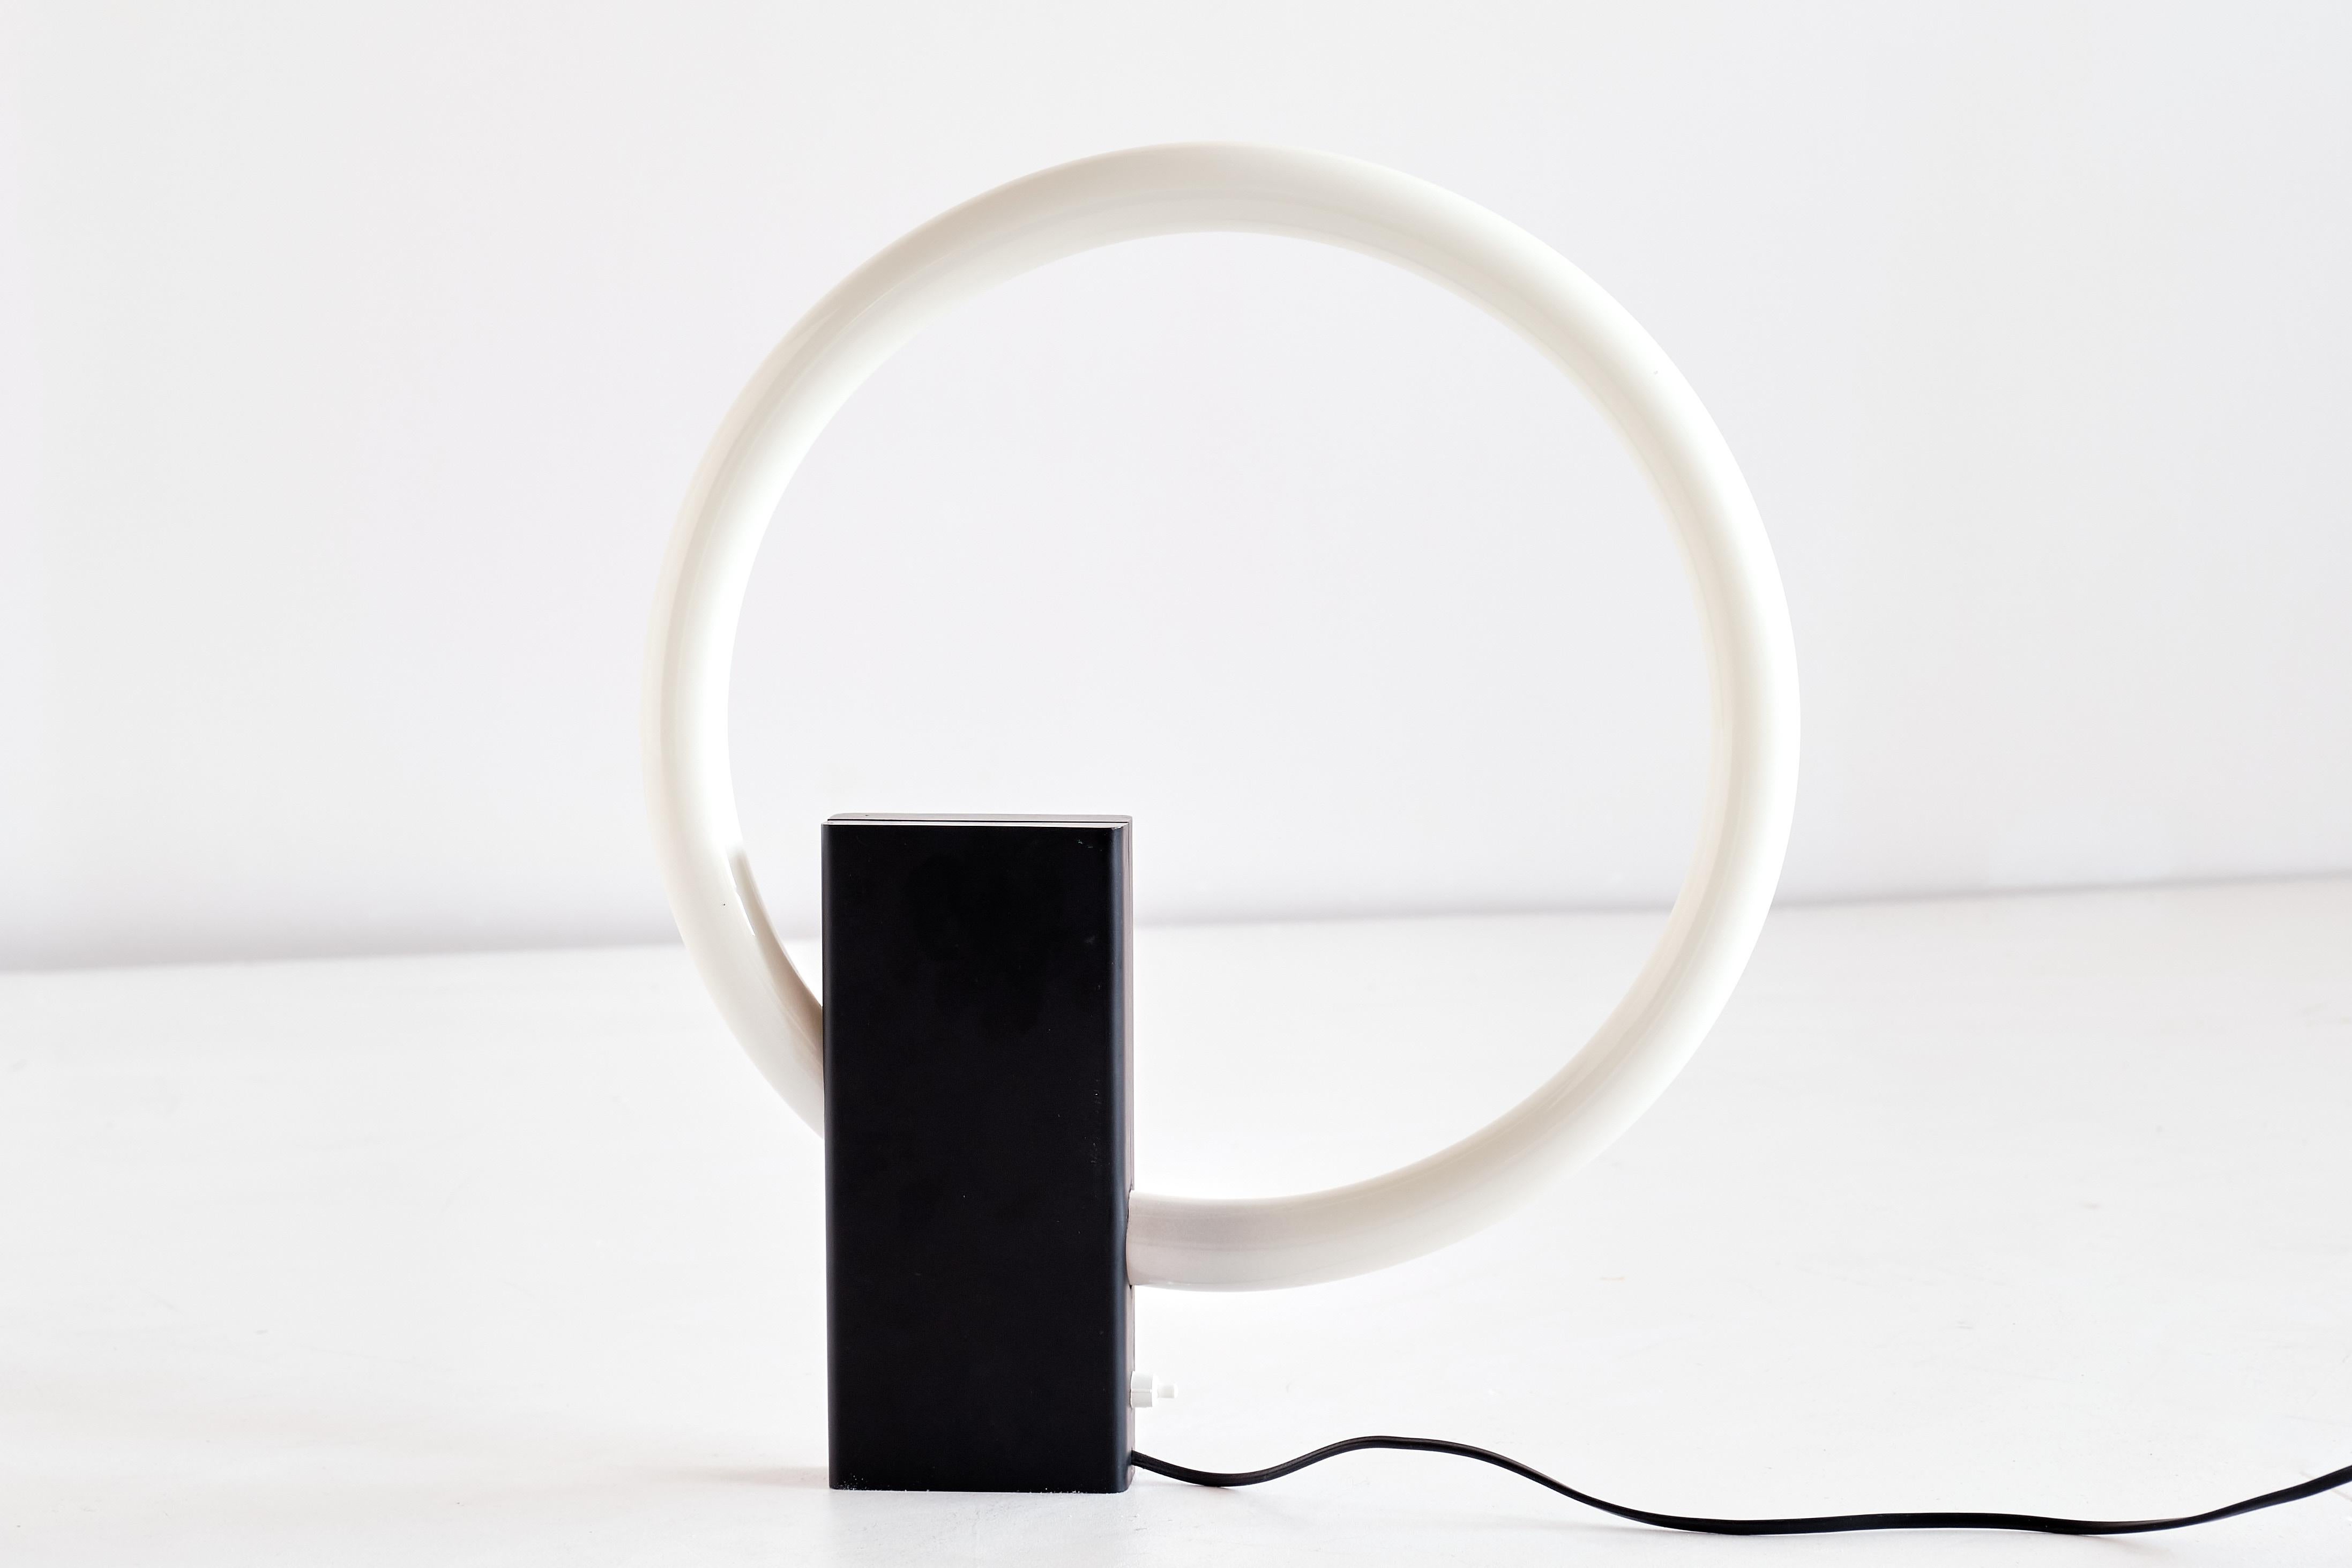 This striking Minimalist table lamp was produced in the Netherlands in the 1970s. The circular bulb is attached to a rectangular vertical base made of black lacquered steel. The (post) modernist design of this rare piece is closely connected to the